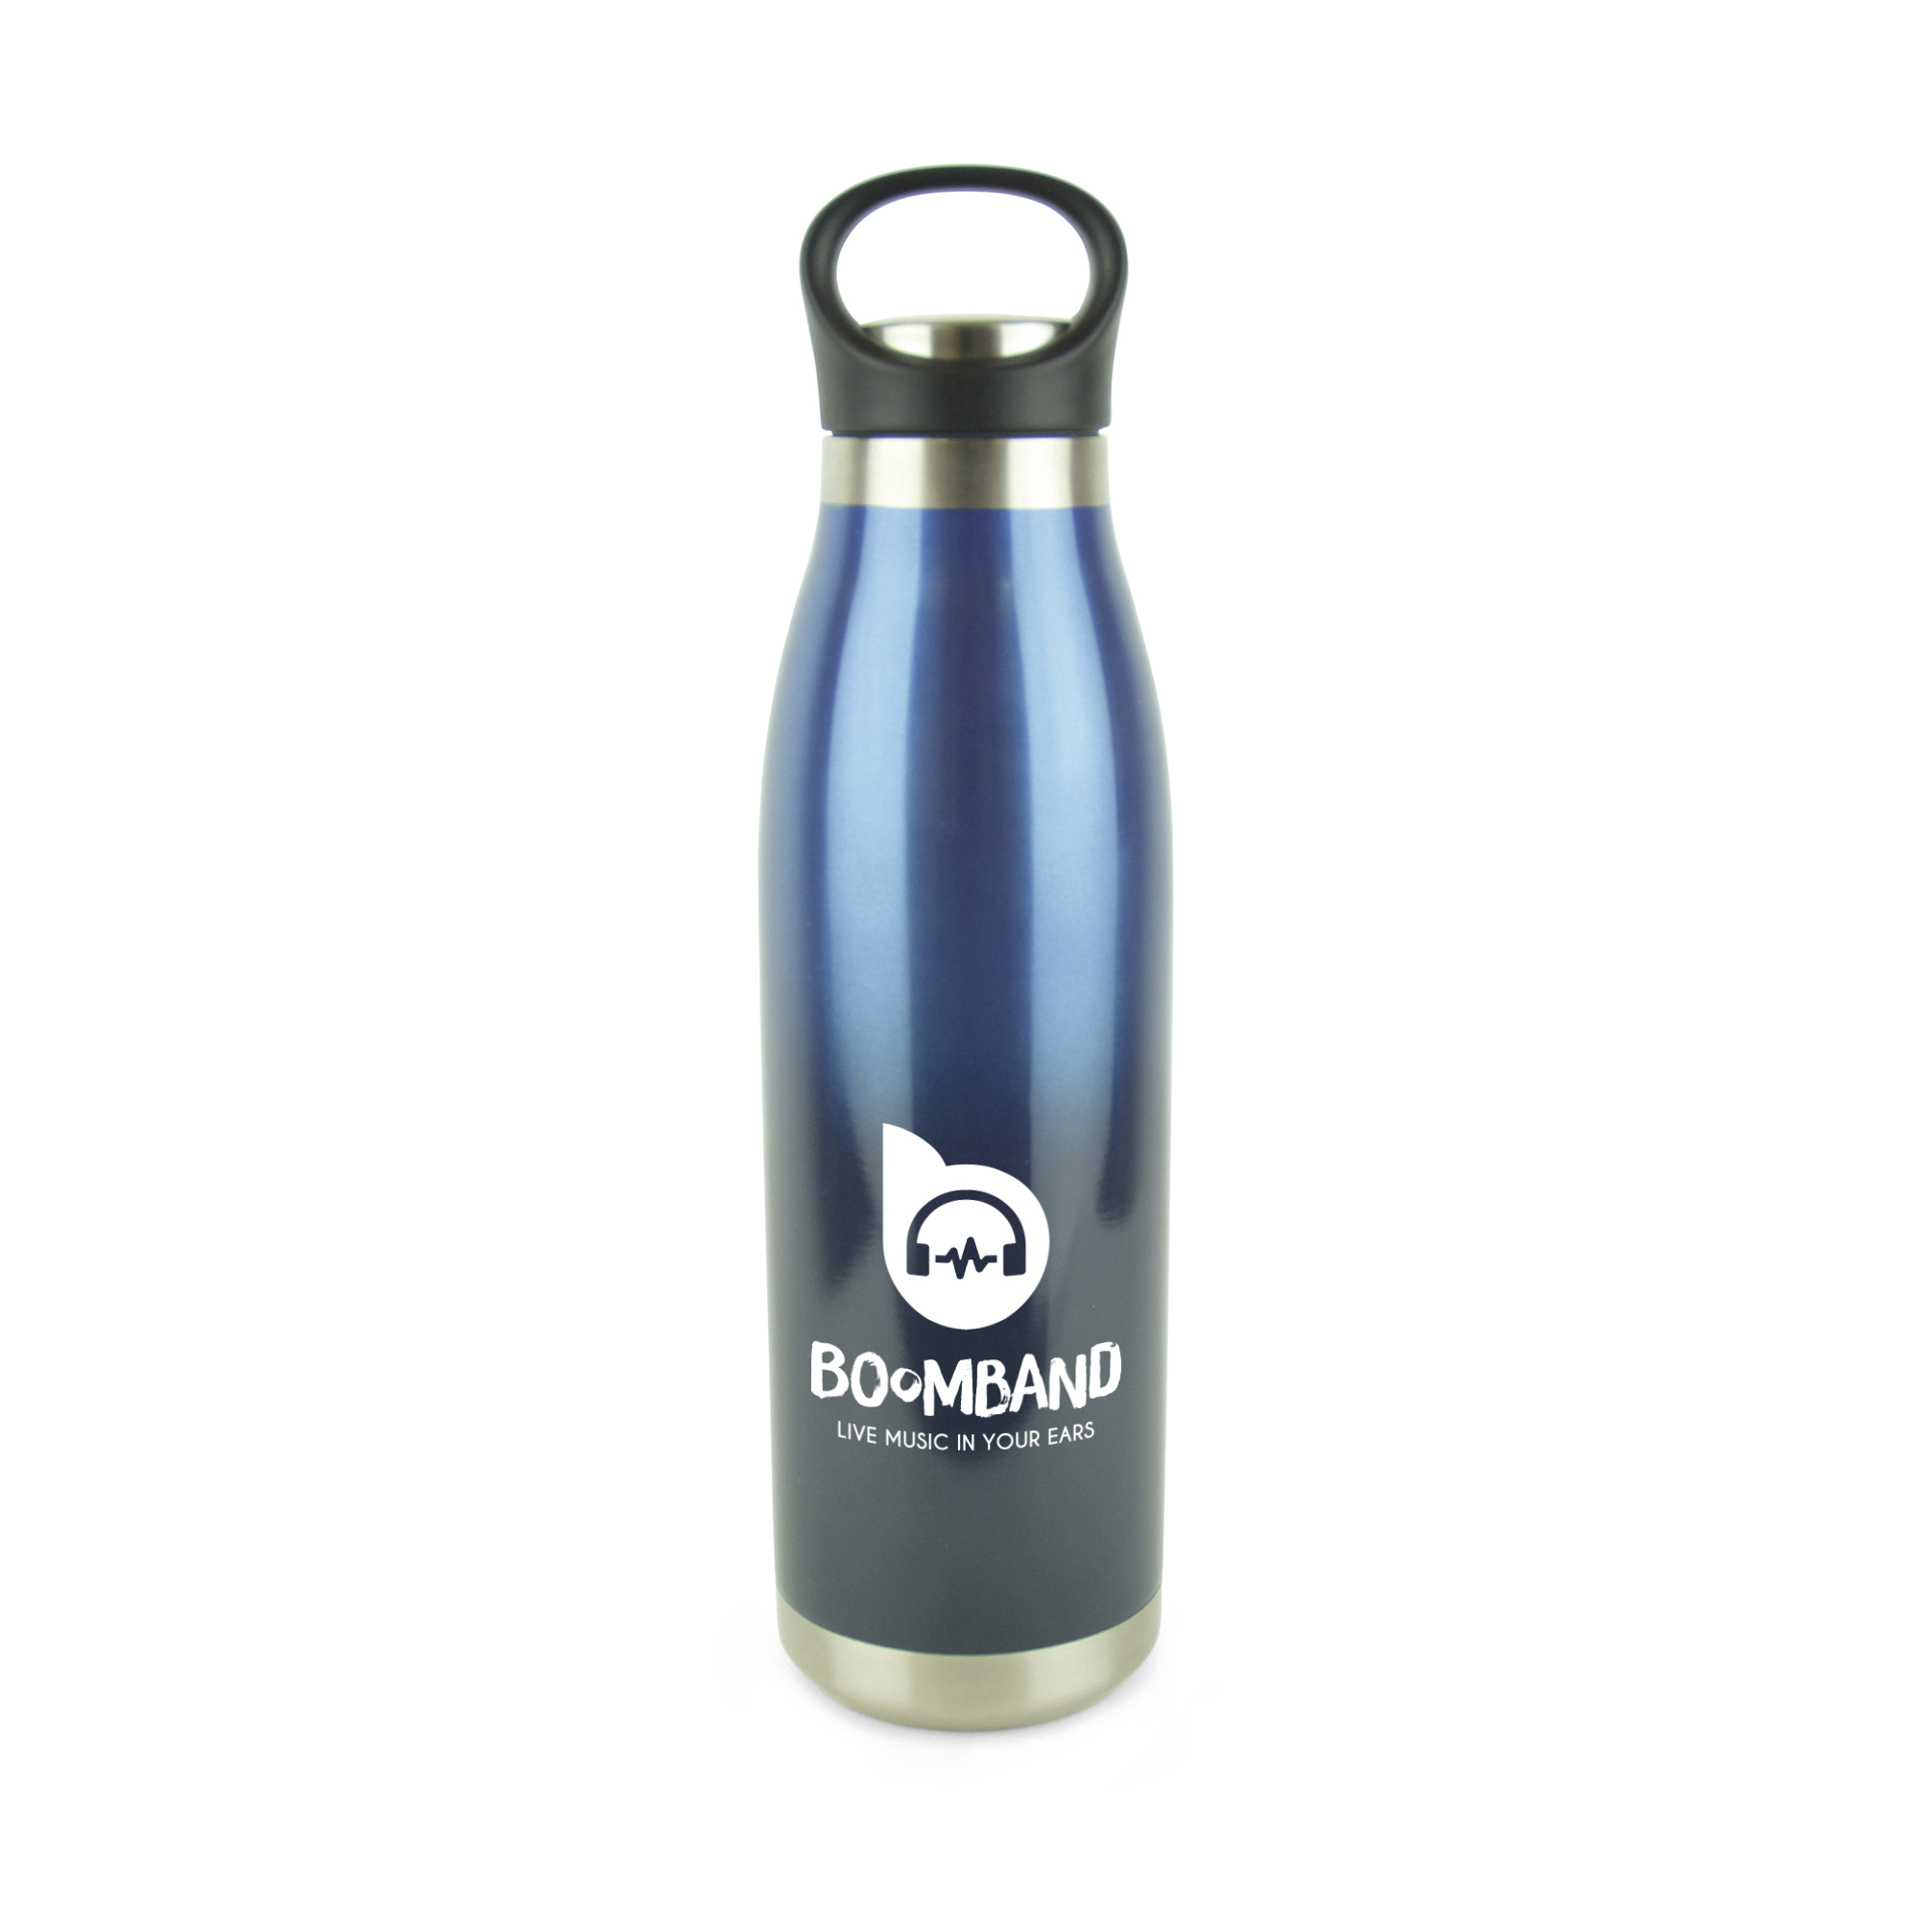 Potter – double walled stainless steel bottle in blue with 1 colour print